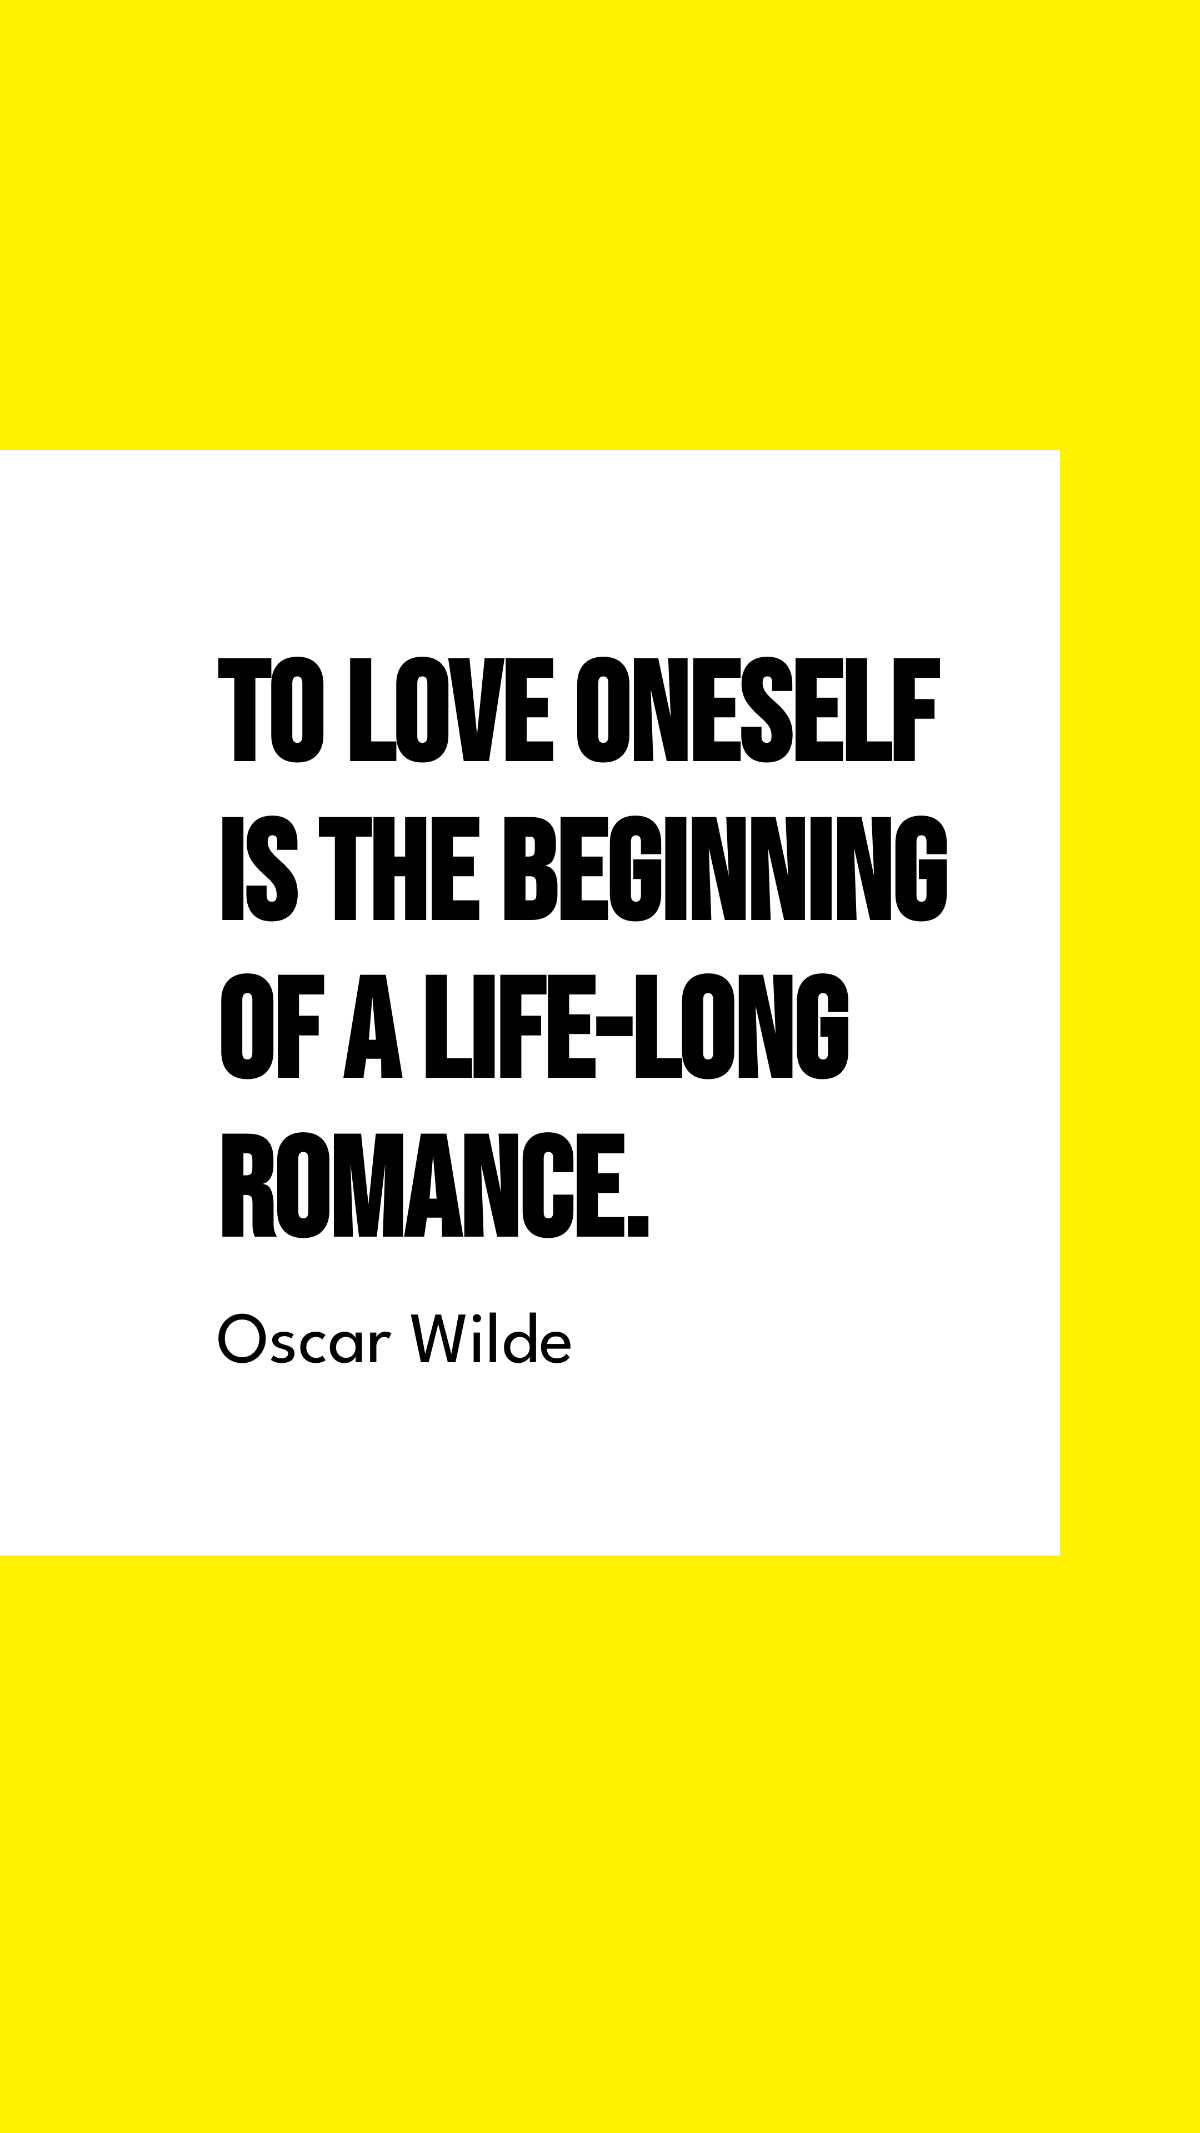 Free Oscar Wilde - To love oneself is the beginning of a life-long romance. Template